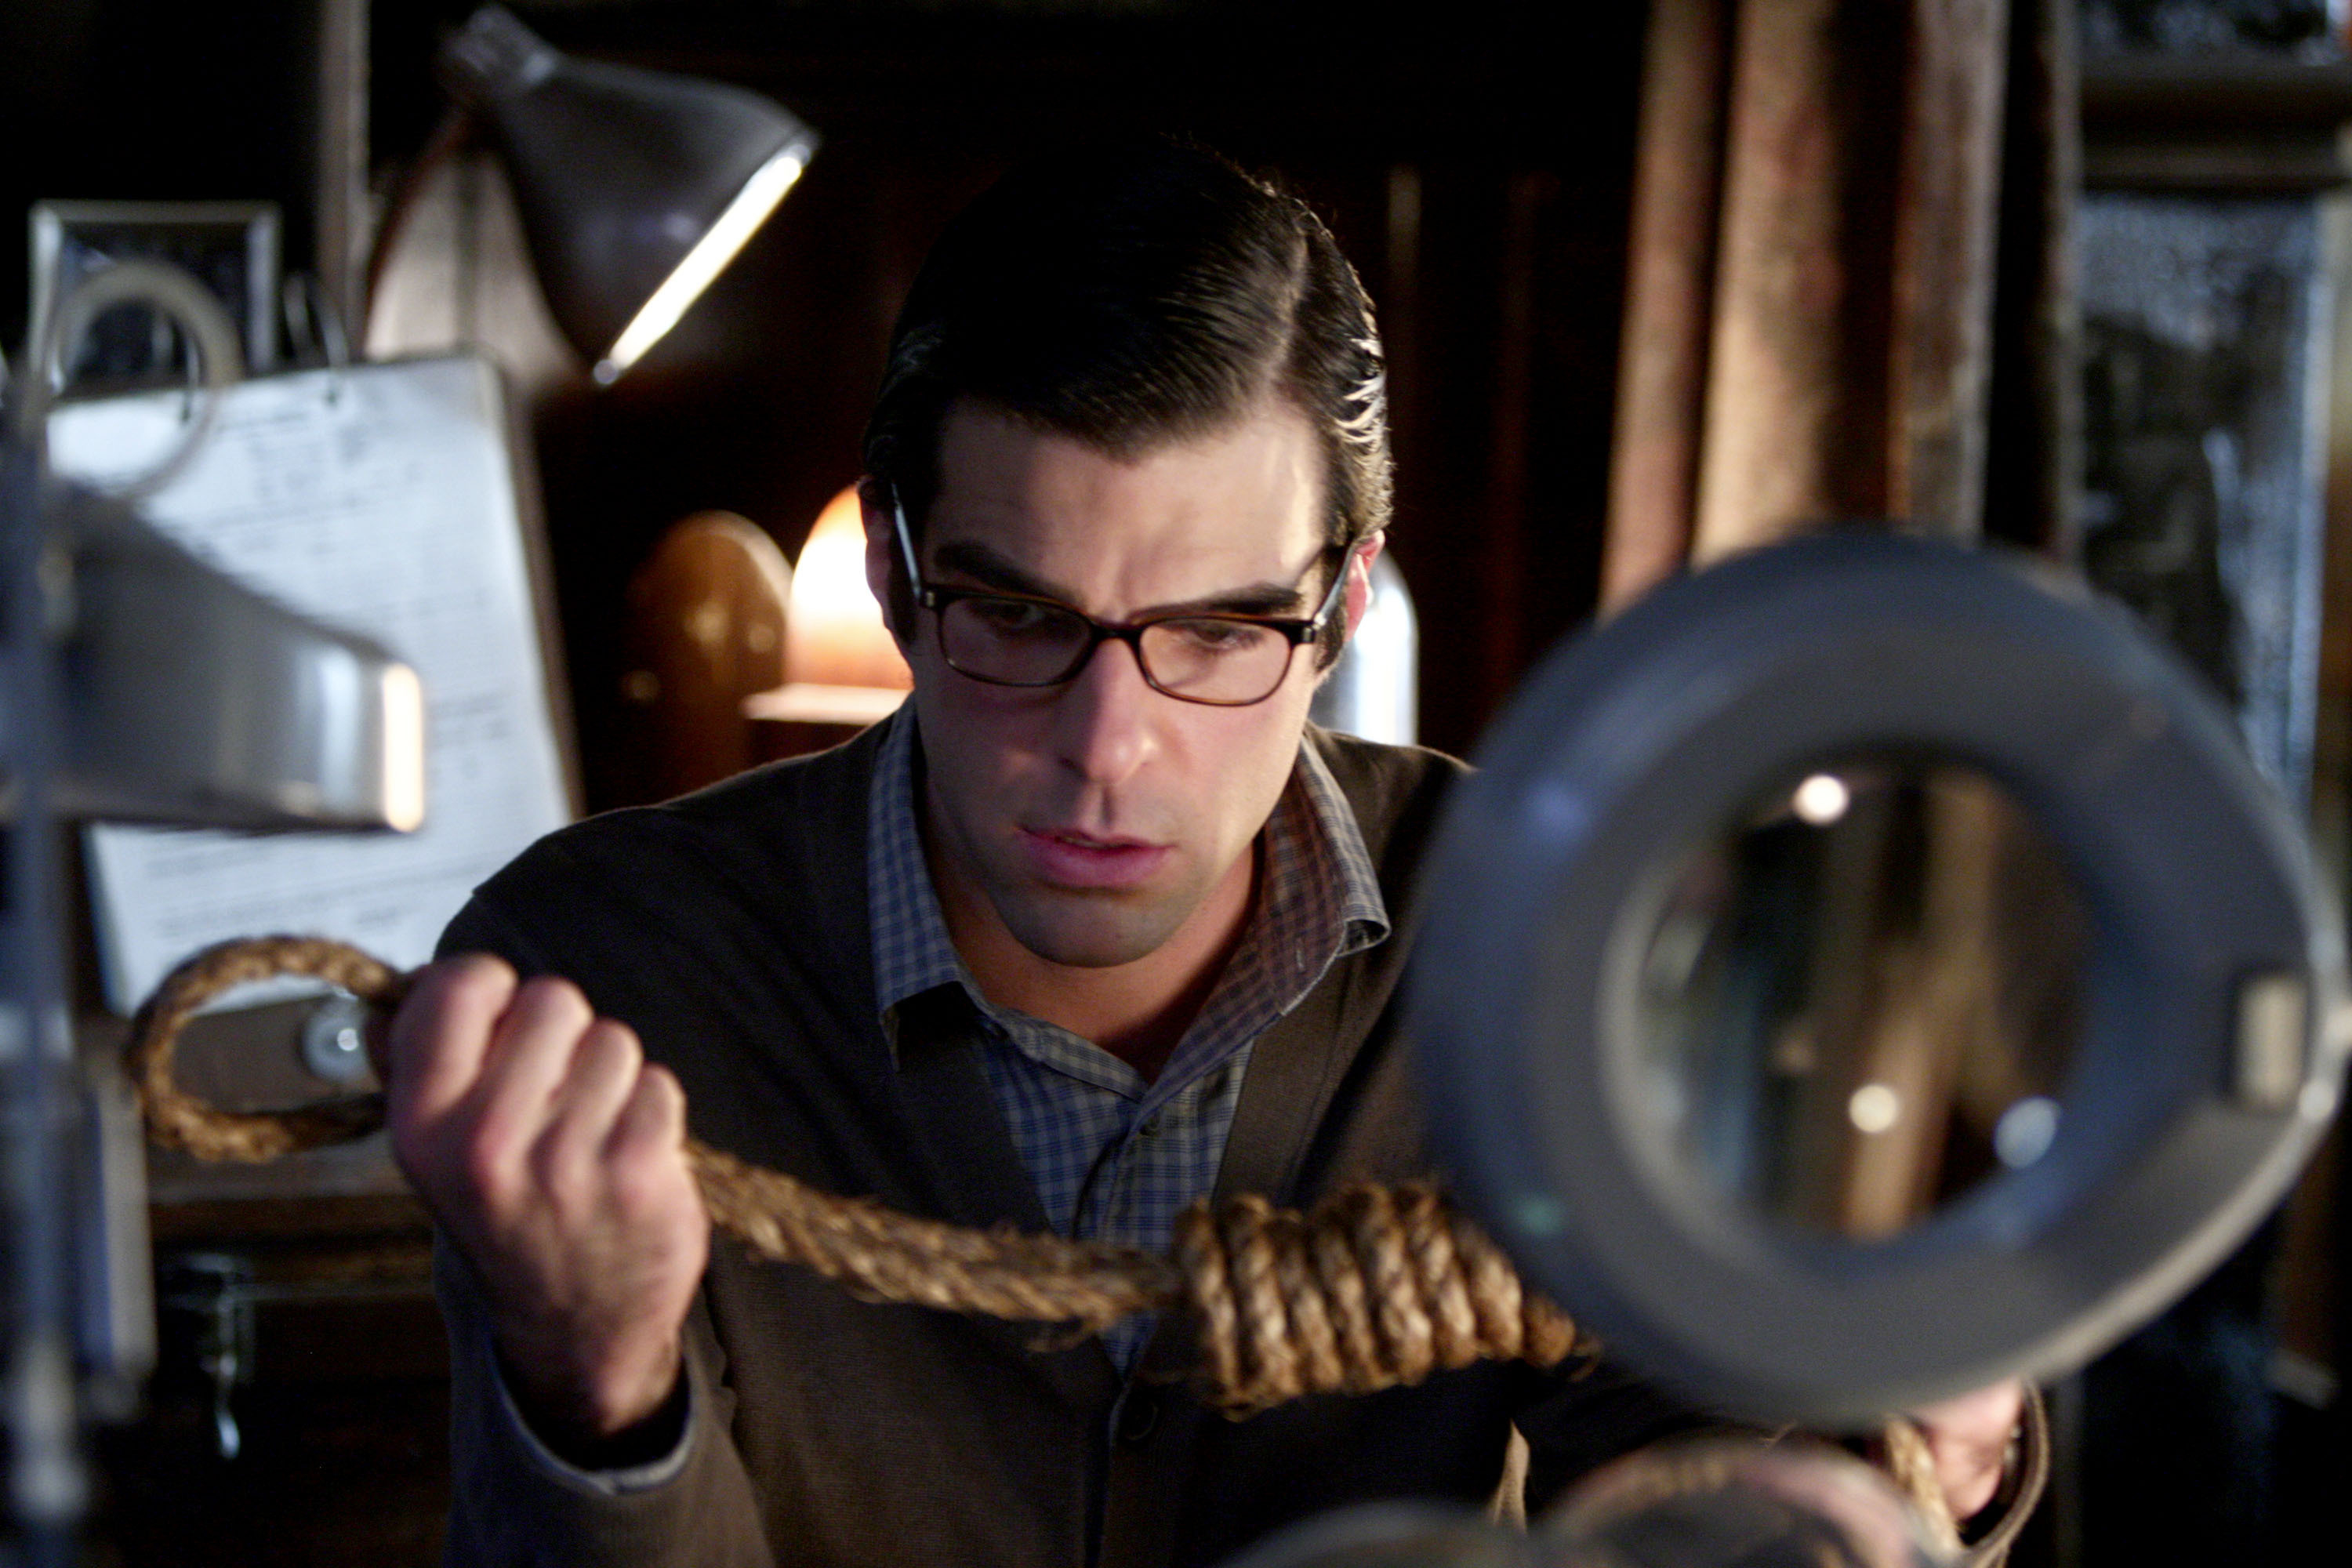 Zachary wearing glasses and examines a rope in a dimly lit room with vintage equipment